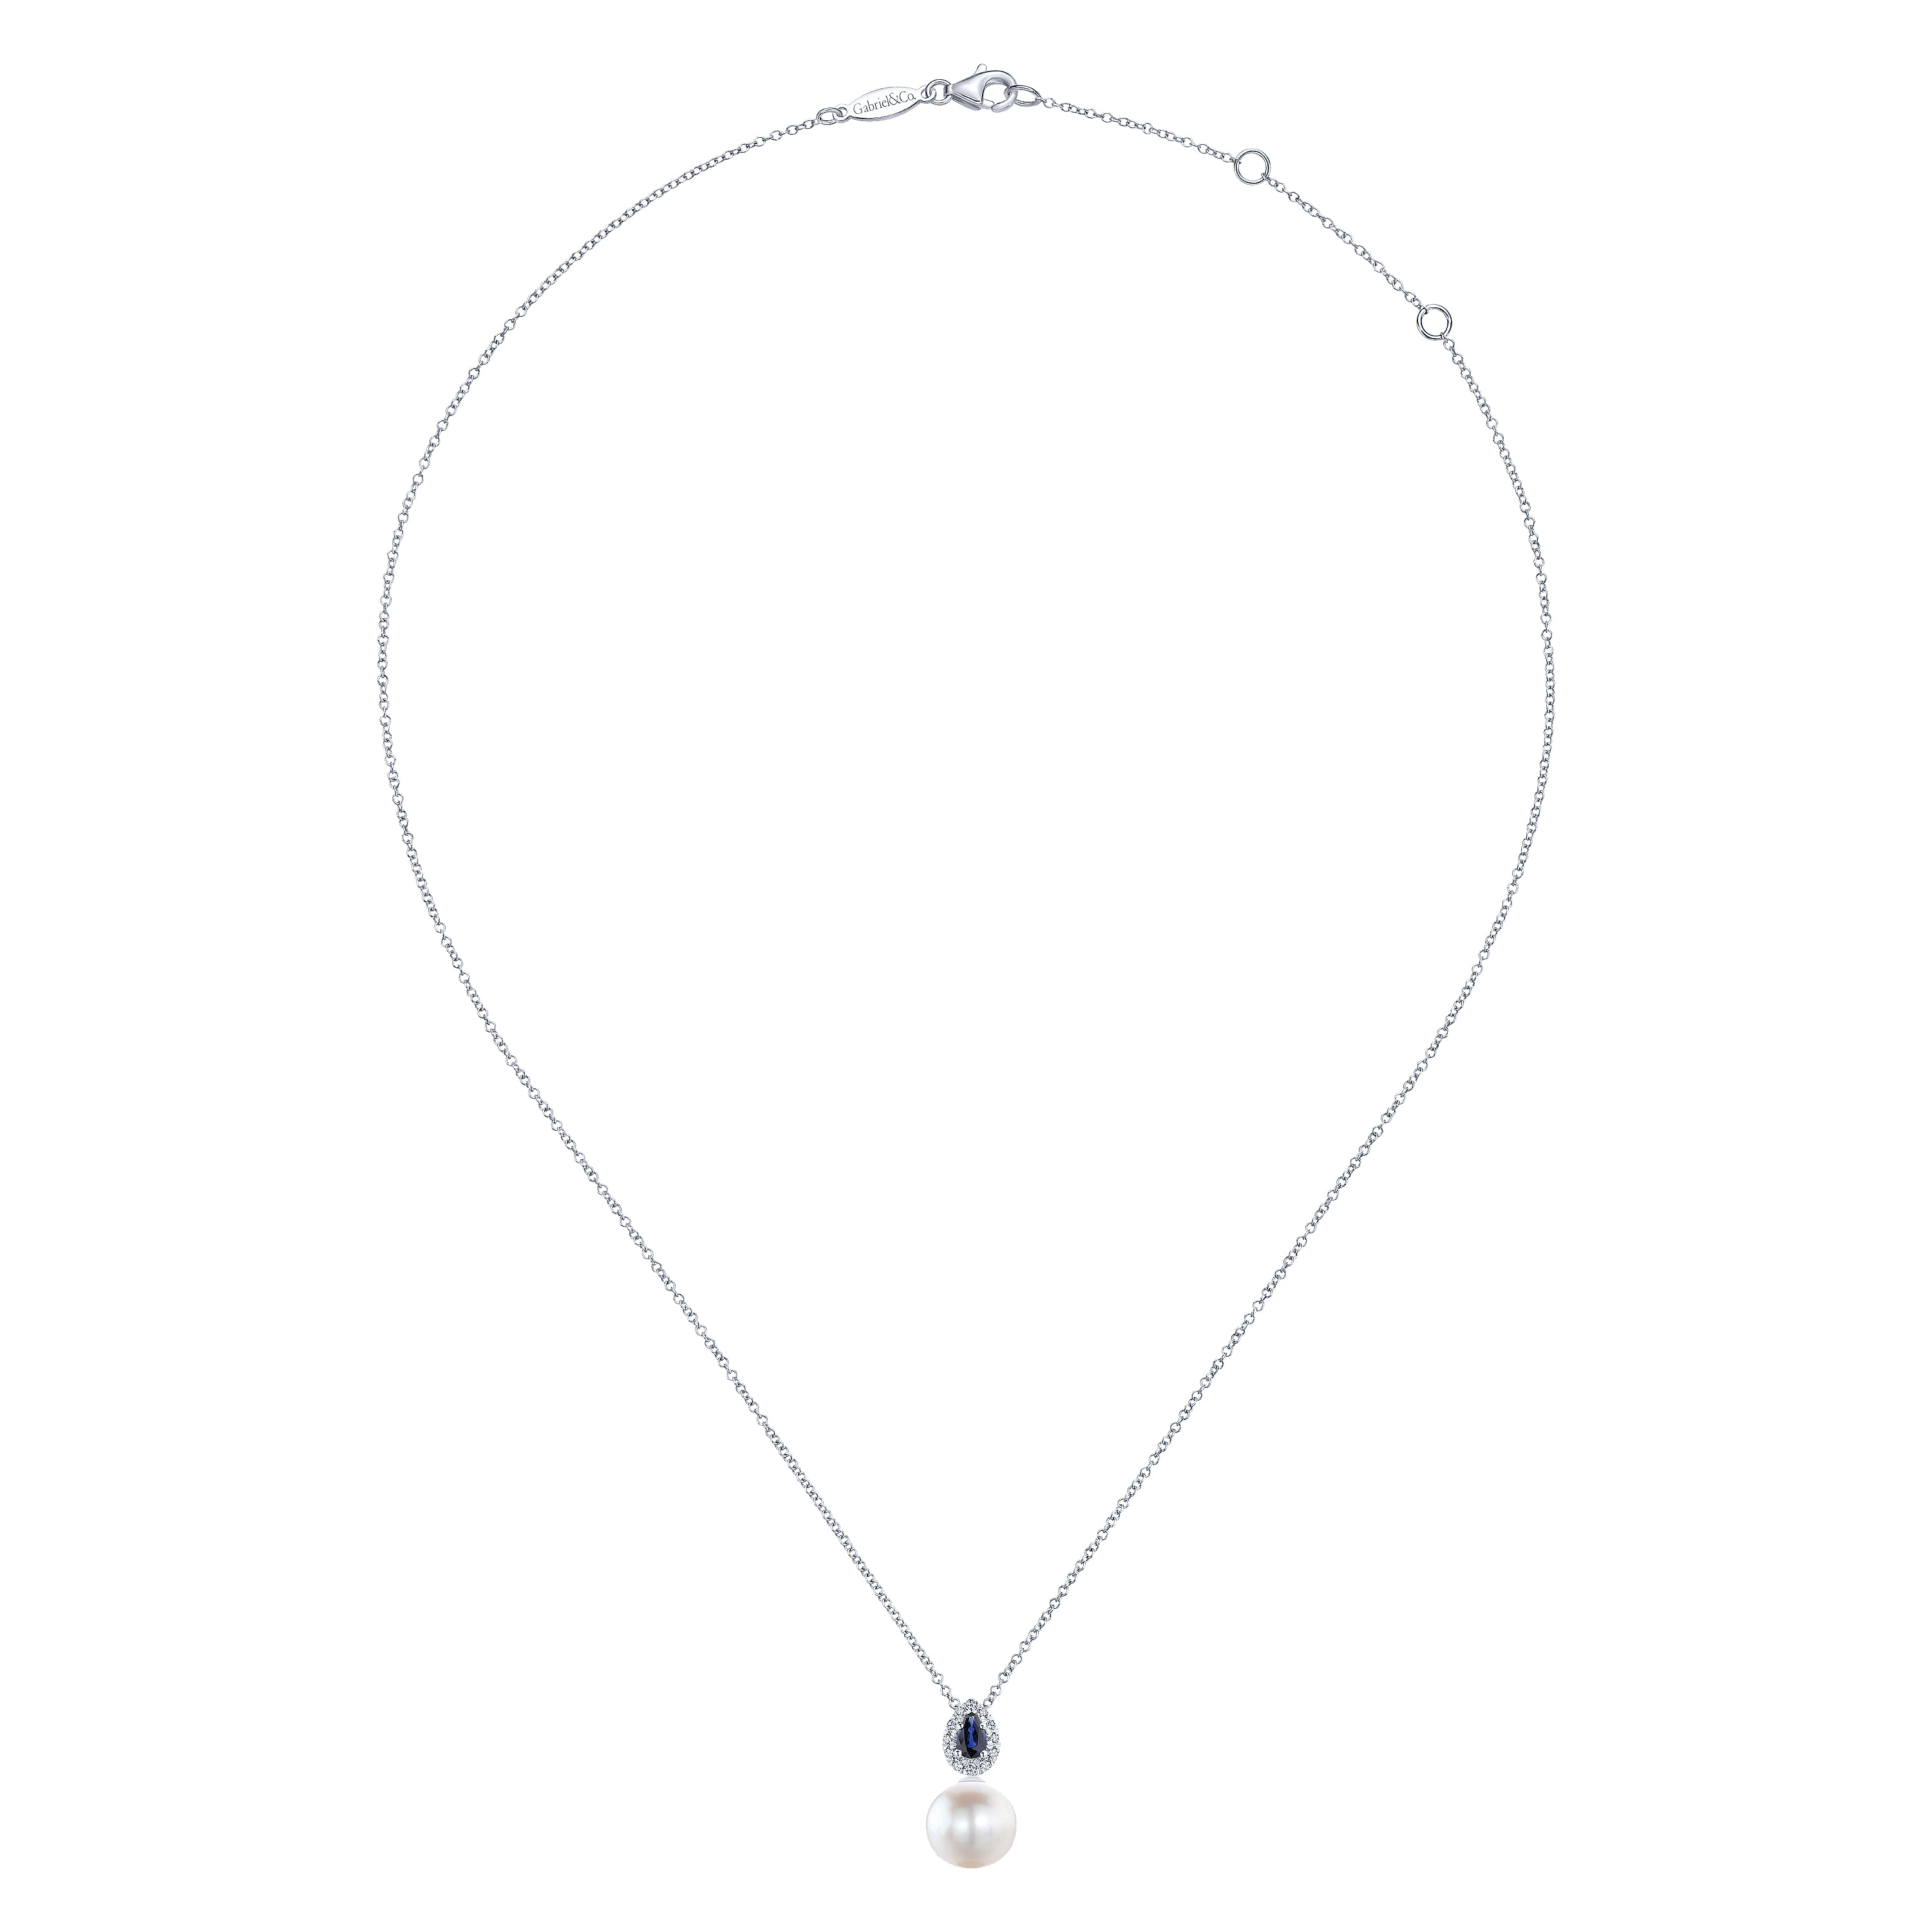 14K White Gold Pear Shaped Sapphire and Diamond Halo Pendant Necklace with Pearl 